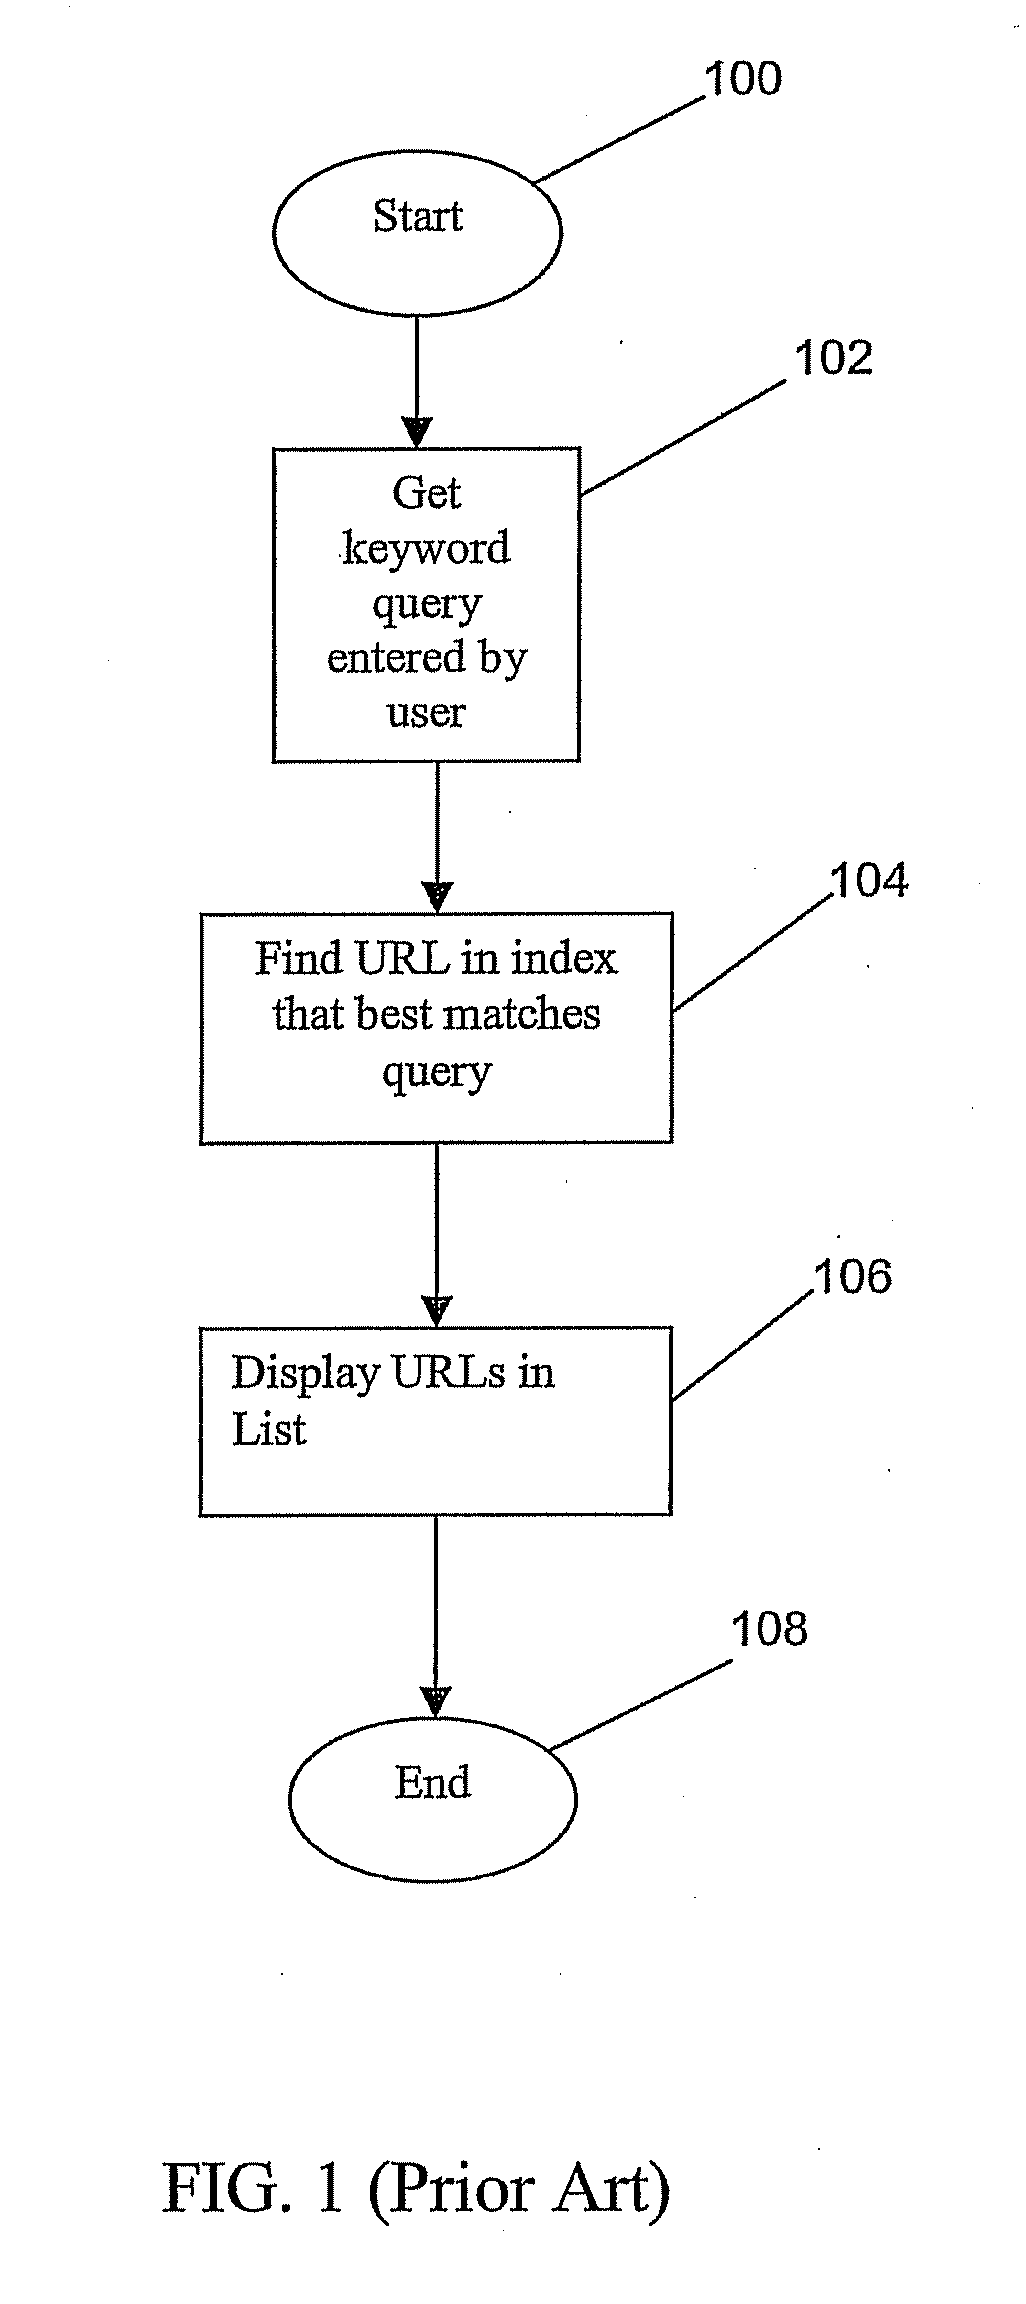 Method and system for variable keyword processing based on content dates on a web page